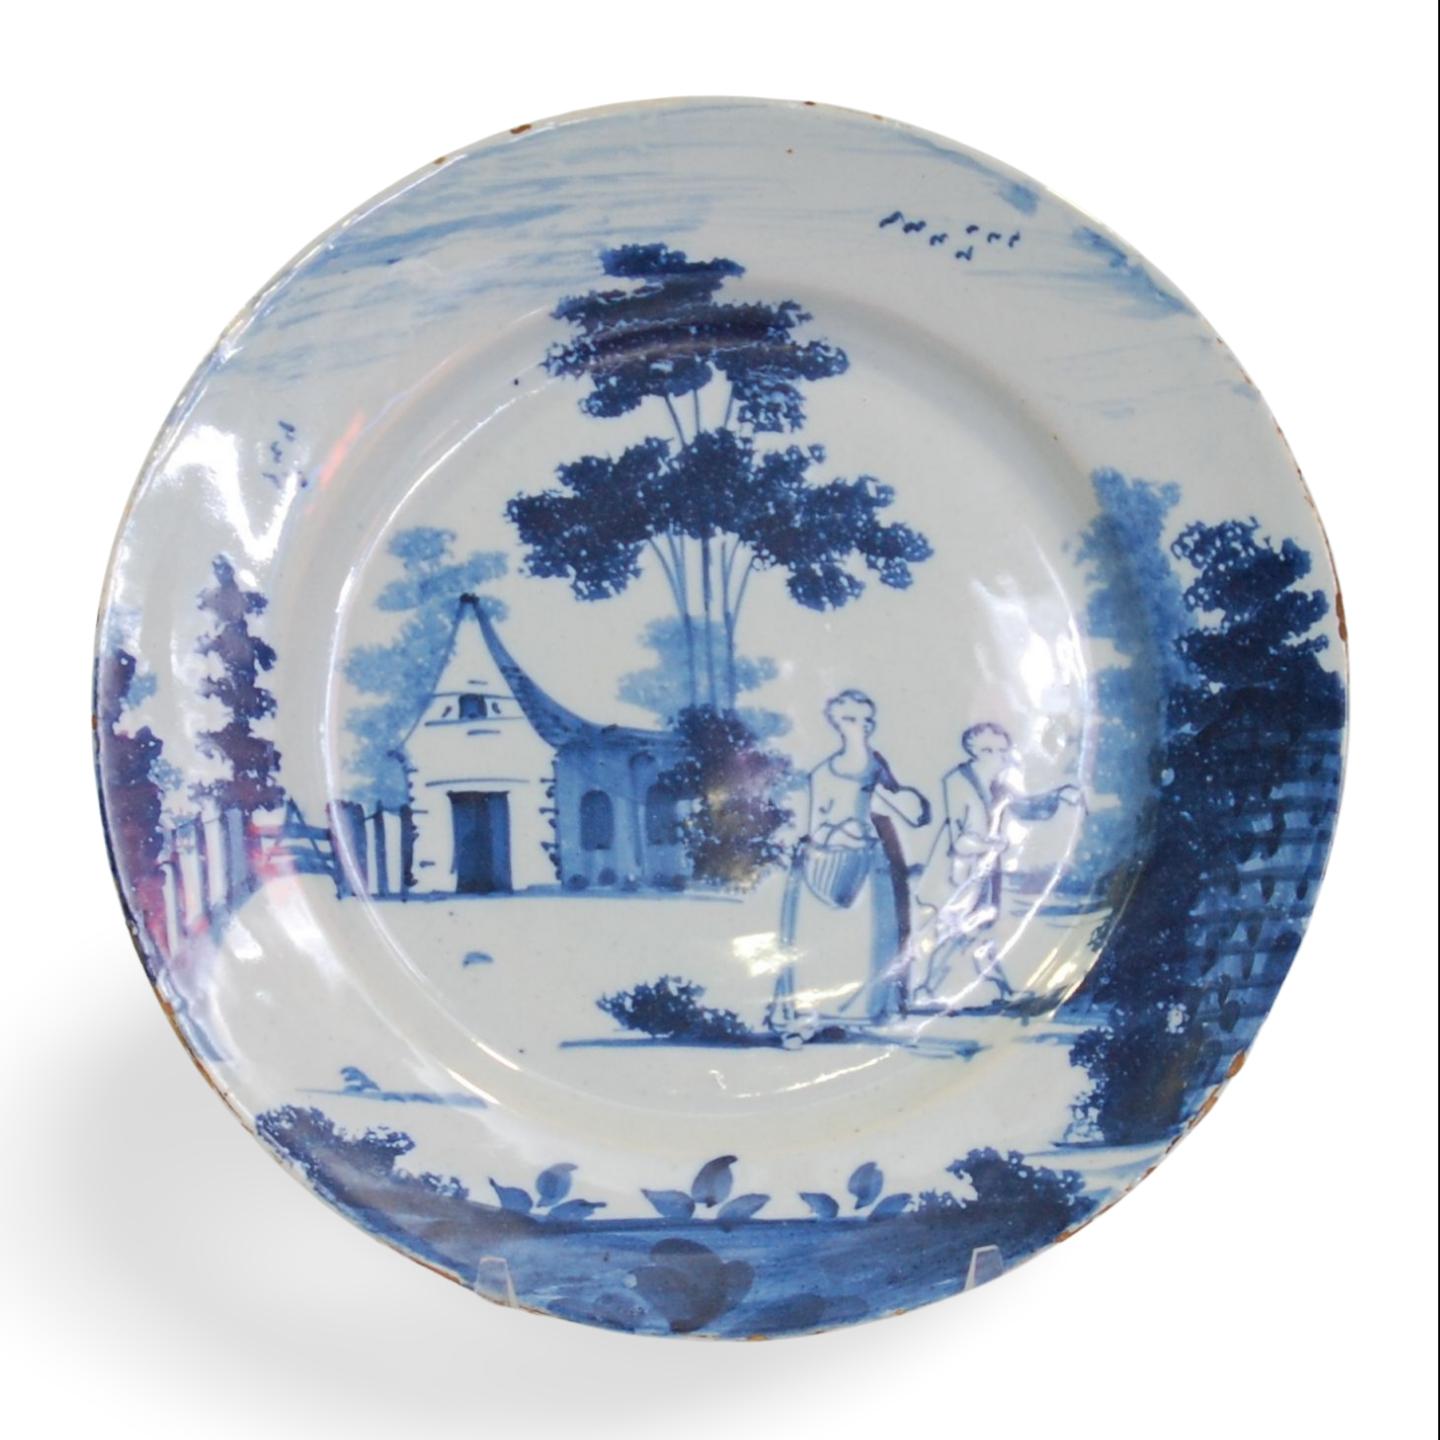 A dinner-plate, painted in the delft style with a couple leacing a church, or perhaps a house. Wincanton pottery, or perhaps London.

English Delftware is considered to be one of the most important forms of English ceramic production of the period,